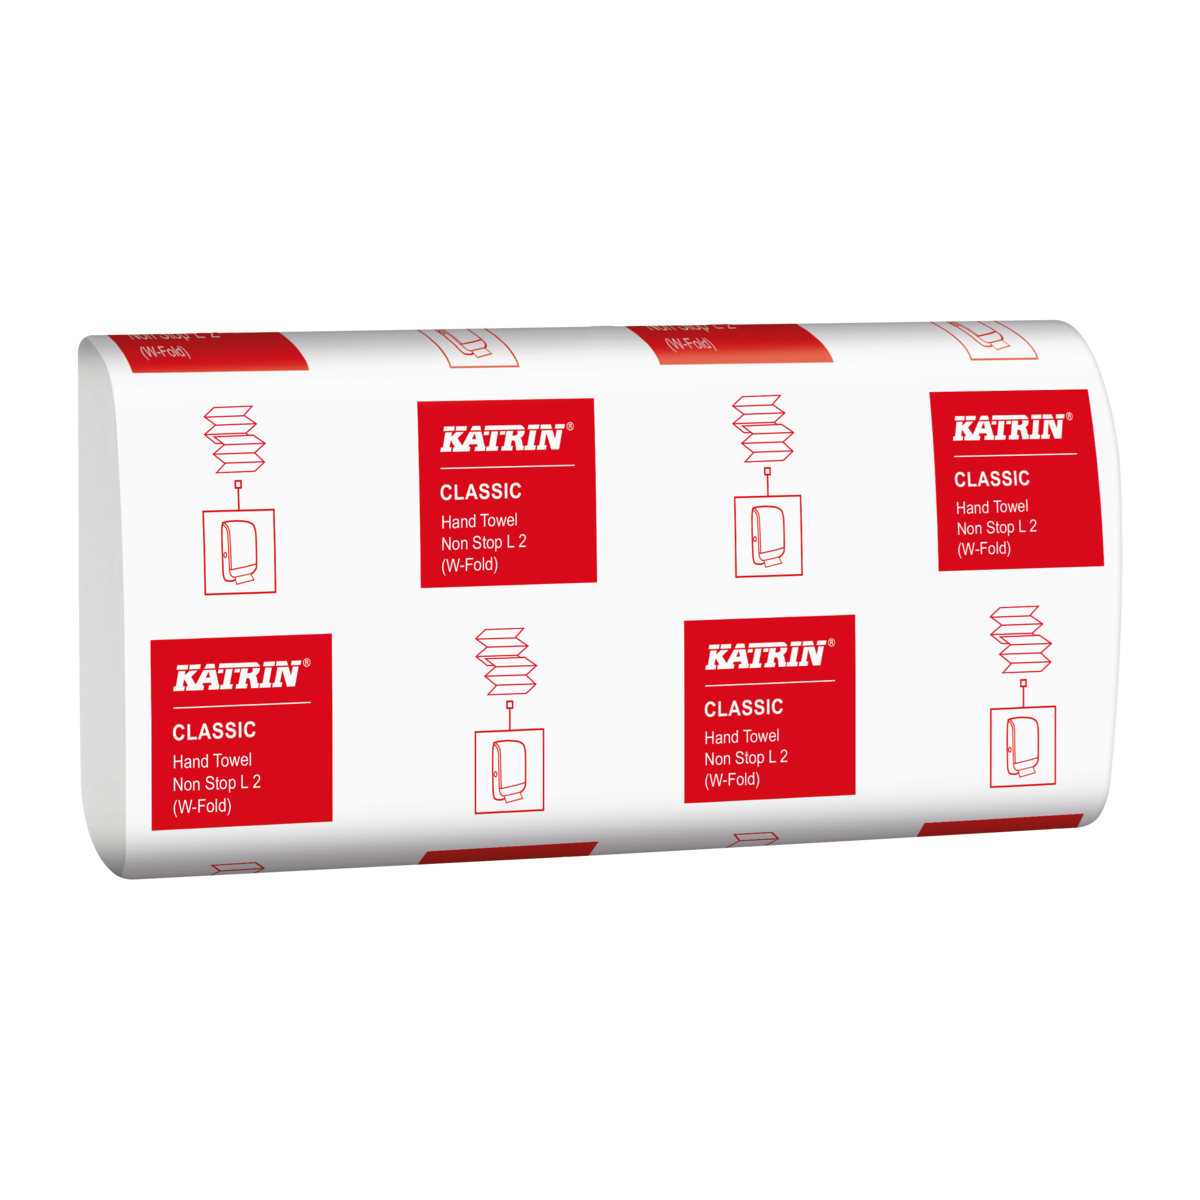 Katrin Classic Hand Towel One Stop L2, Case of 3000 - 345152